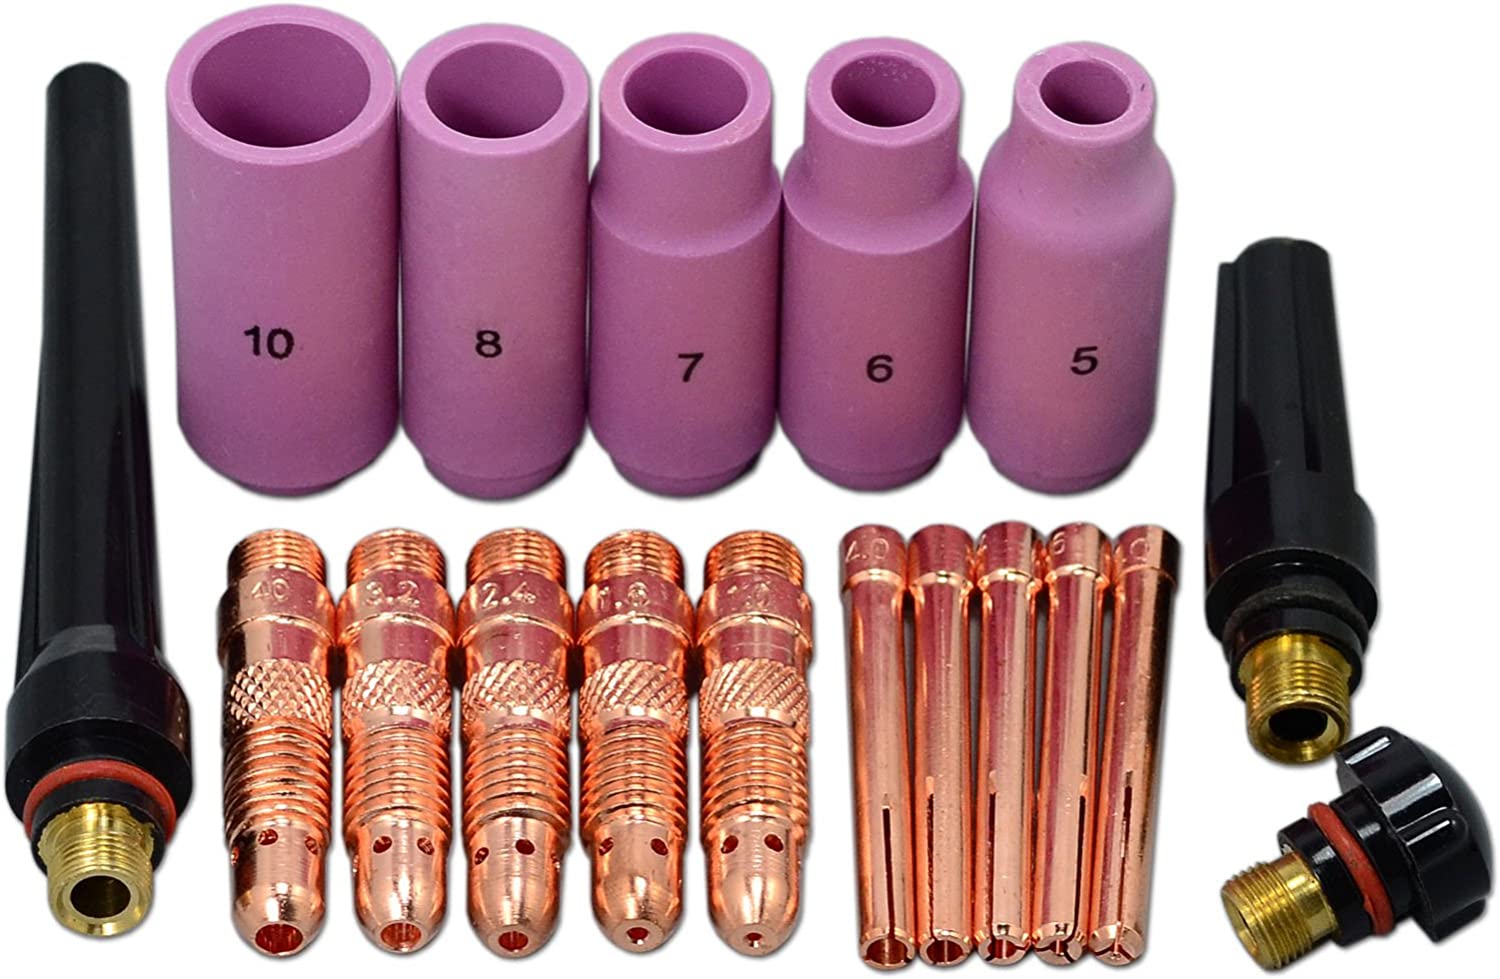 TIG Collet Body Consumables Accessorie Assorted Size Fit QQ300 PTA DB SR WP 17 18 26 TIG Welding Torch 18pcs